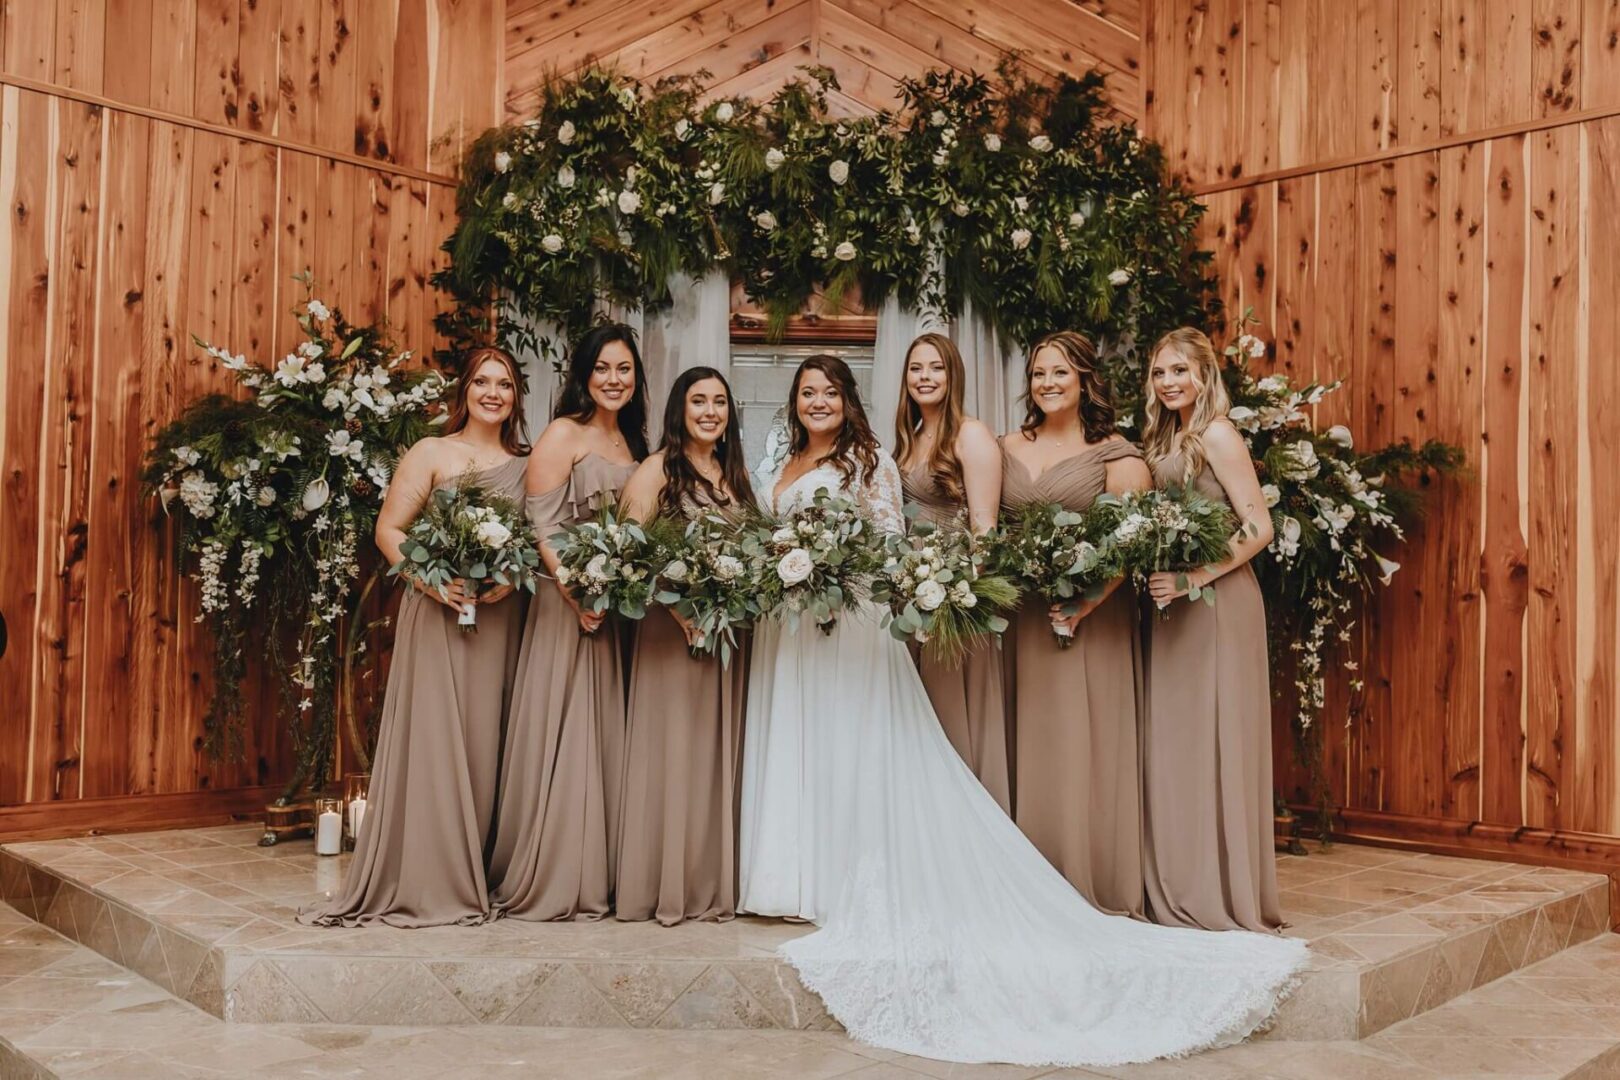 The bride and her bridesmaids pose in front of a wooden barn, with electric car chargers visible in the background.